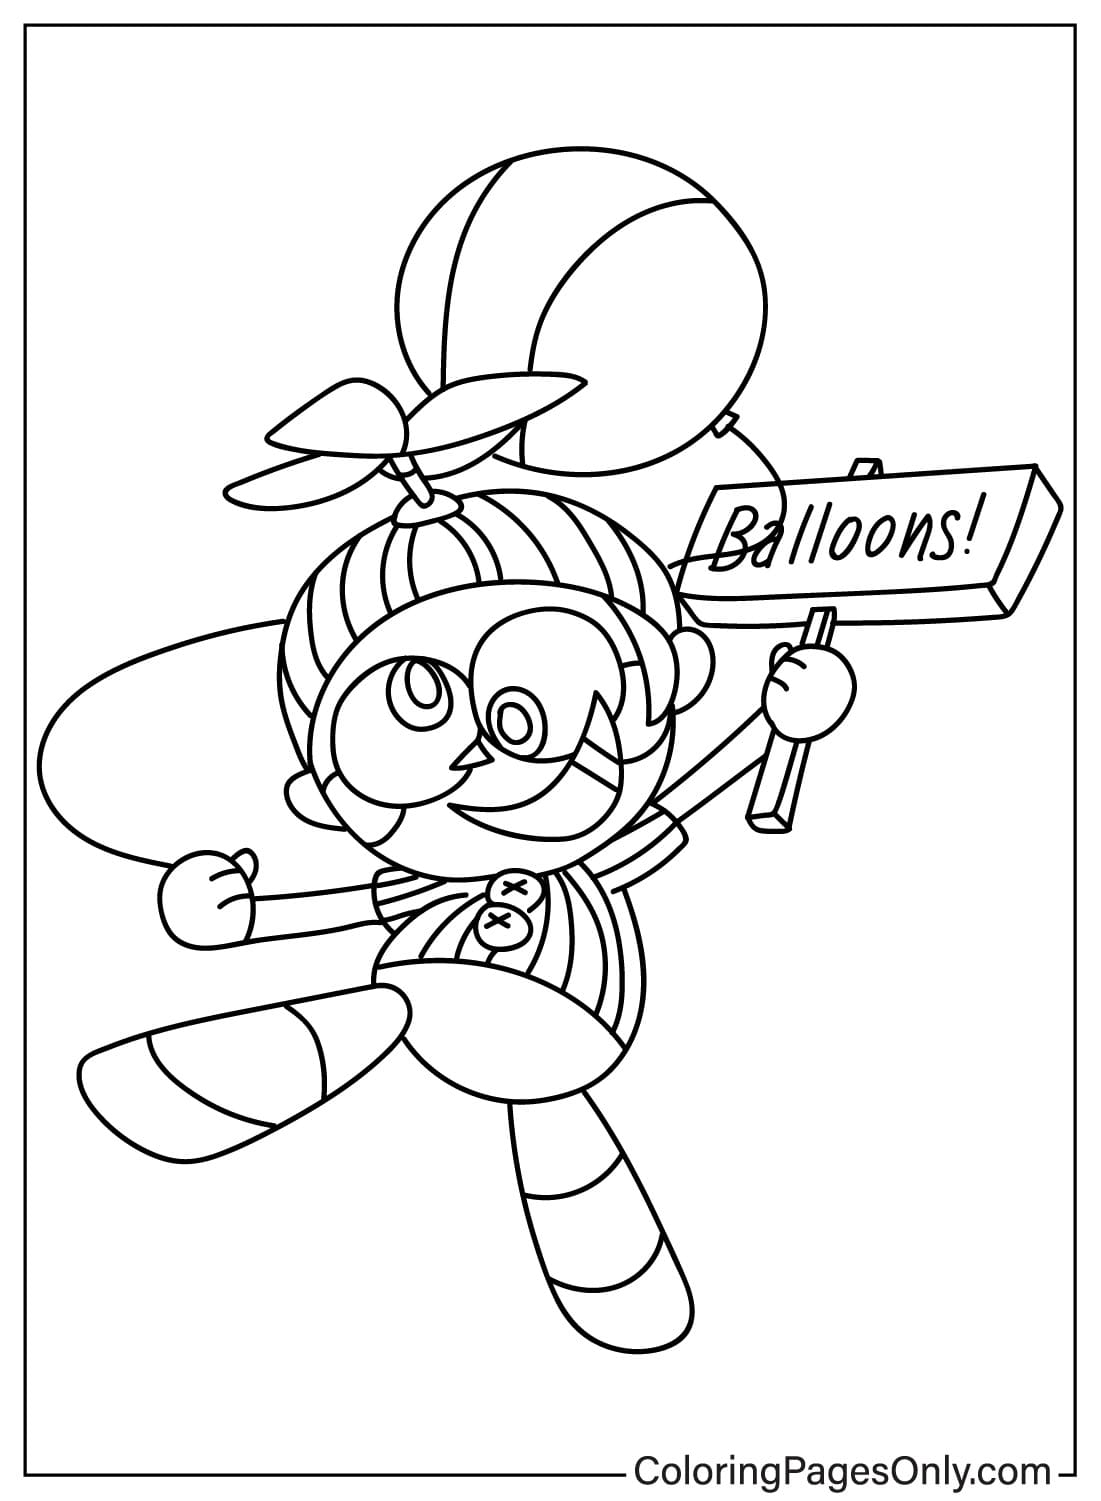 Images Balloon Boy Coloring Page from Balloon Boy